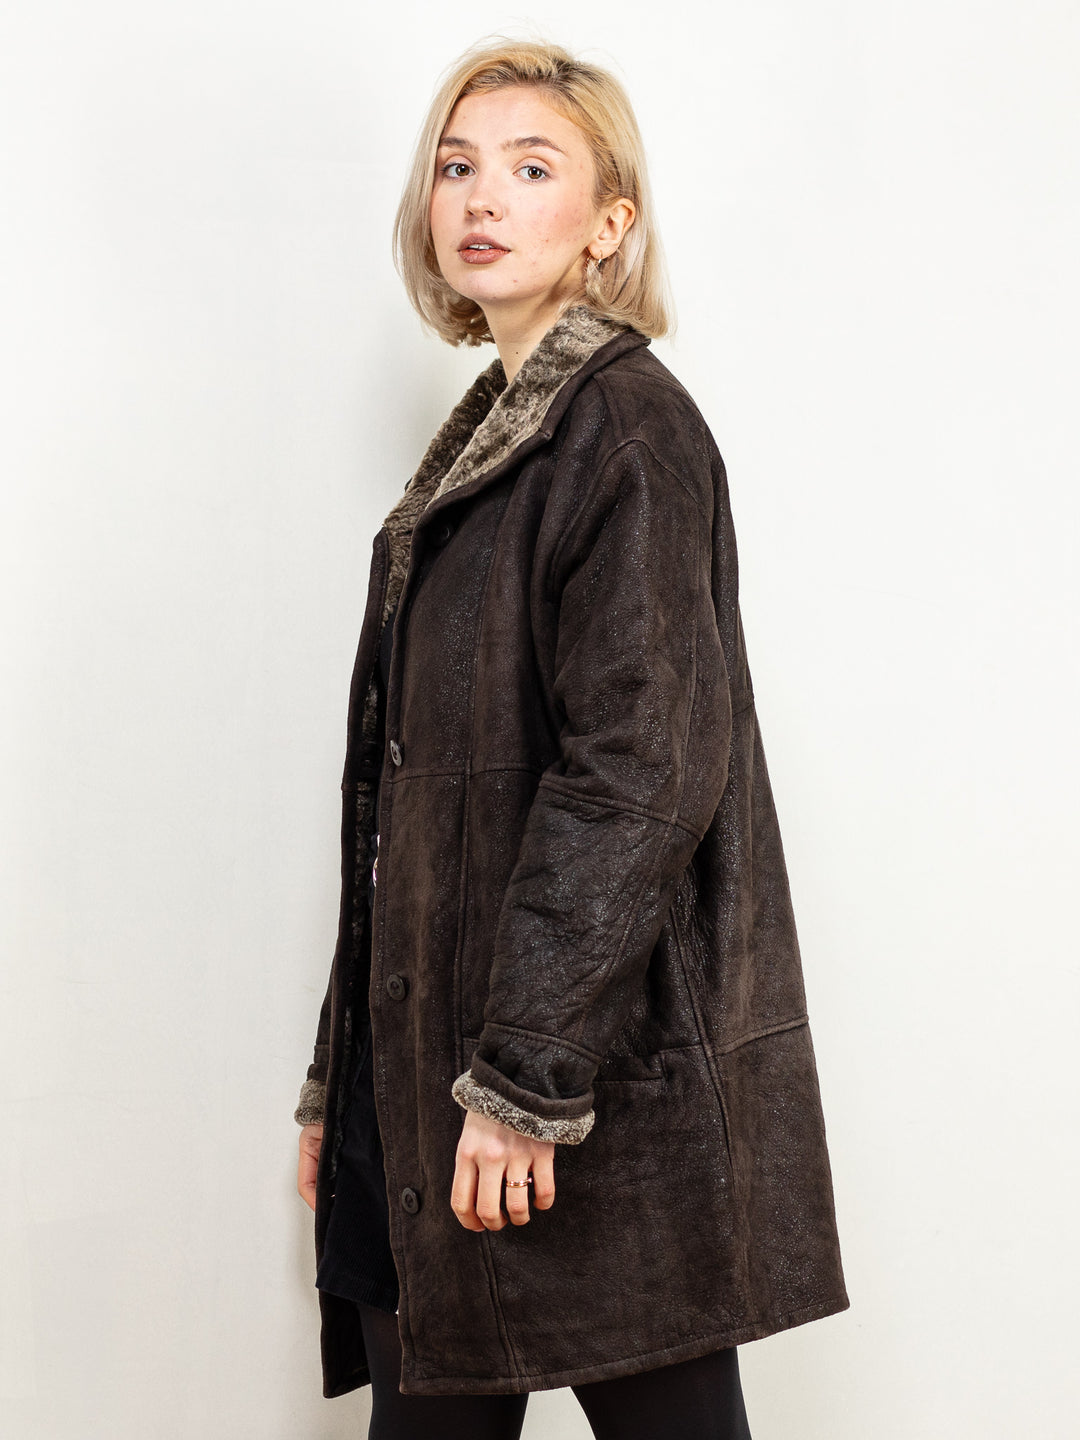 Brown Shearling Coat 90's women vintage boho western style sustainable warm winter overcoat throwback timeless size large